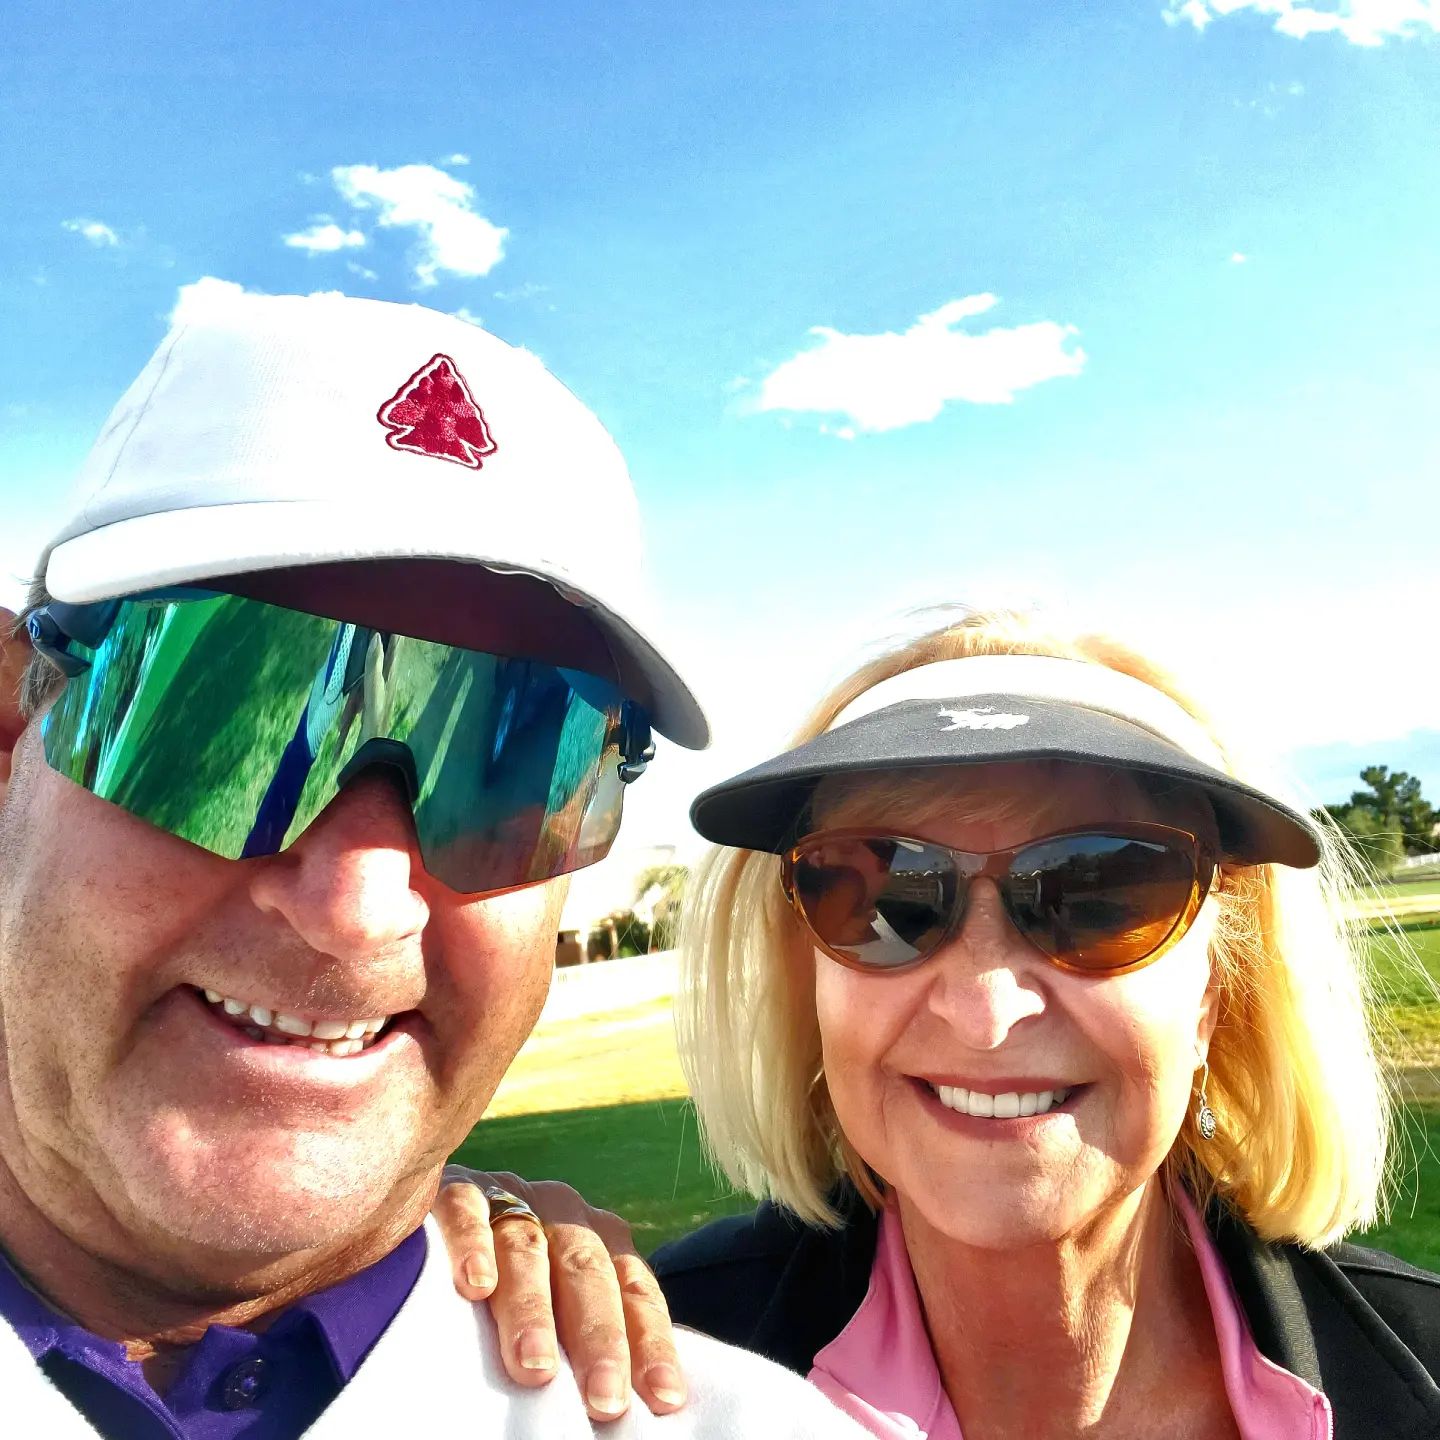 TIFOSI TUESDAY. I love my new "Rail" model sunglasses. It's like looking out a bay window. Perfect for reading greens, cycling, kayaking and hiking. Alice has her prescription Tifosis. We don't go anywhere without them .Check out the new lines @tifosioptics.com #sunglasses #golf #golfcontentnetwork #instacool #instagolf #golfstagram #tifosioptics #cool #lookinggood #eyewear #eyewearfashion #couples #couplesgoals #beautiful #spousesday #fun